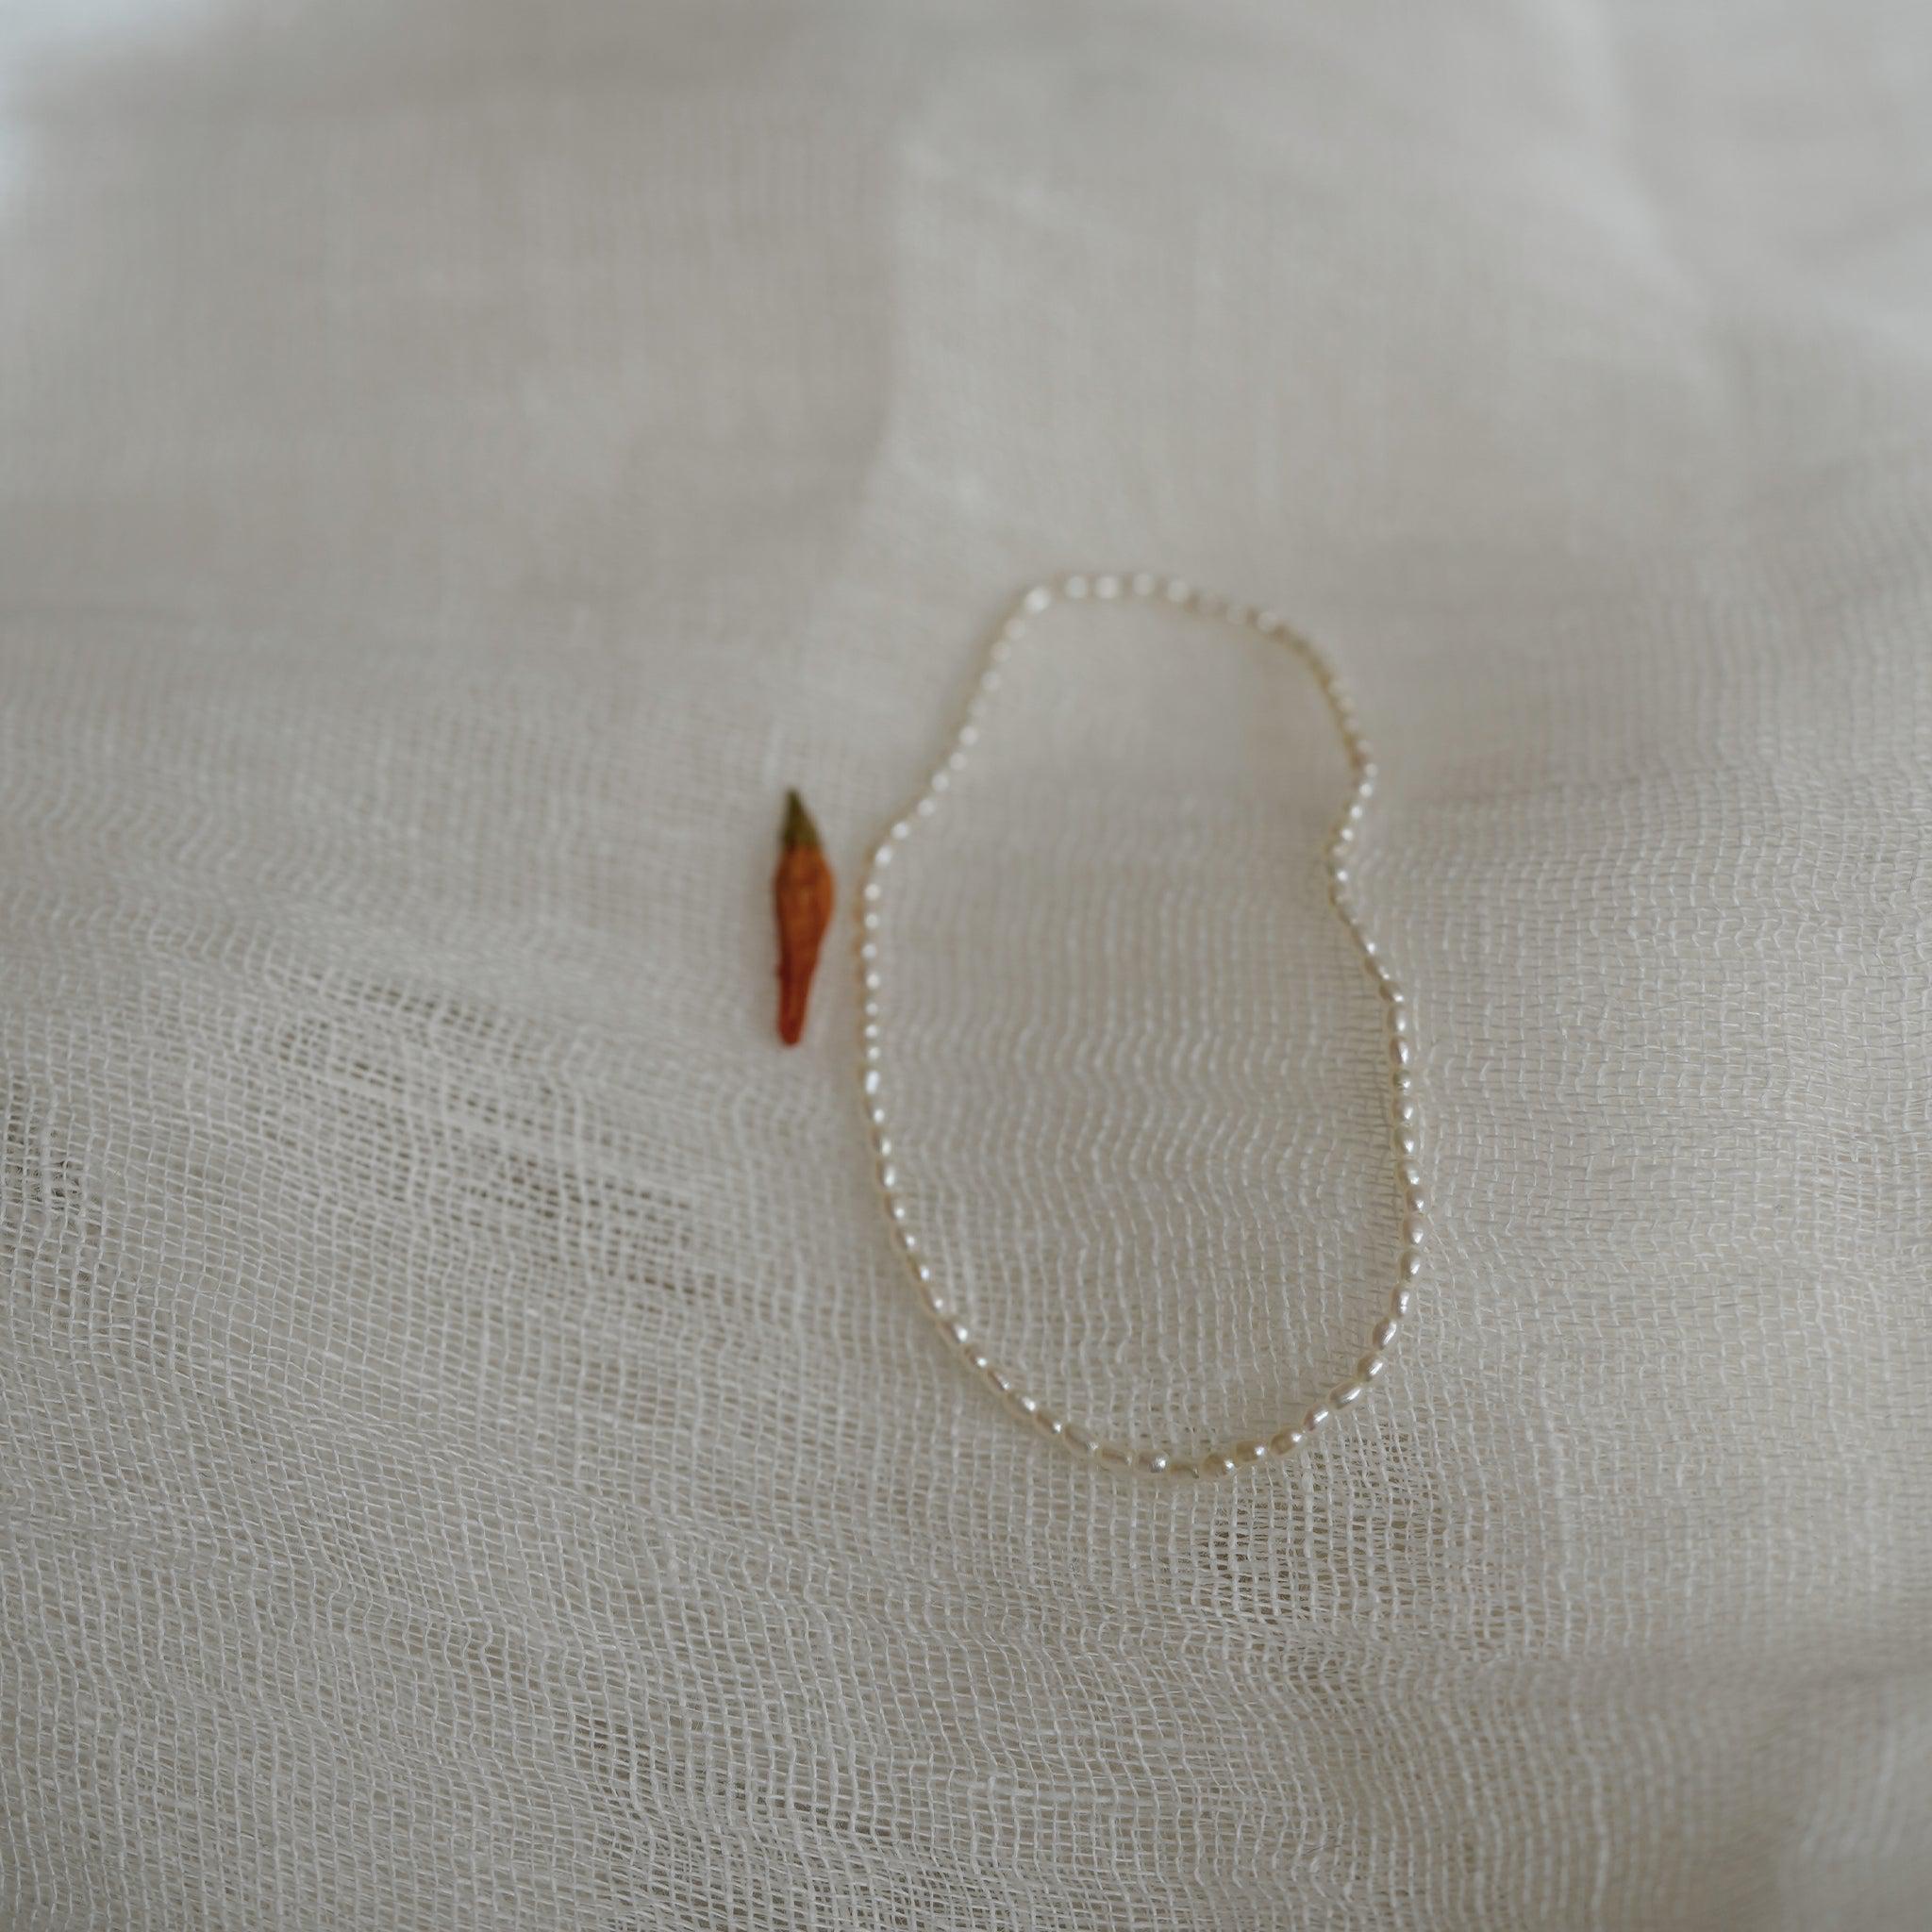 Tiny Pearl Anklet